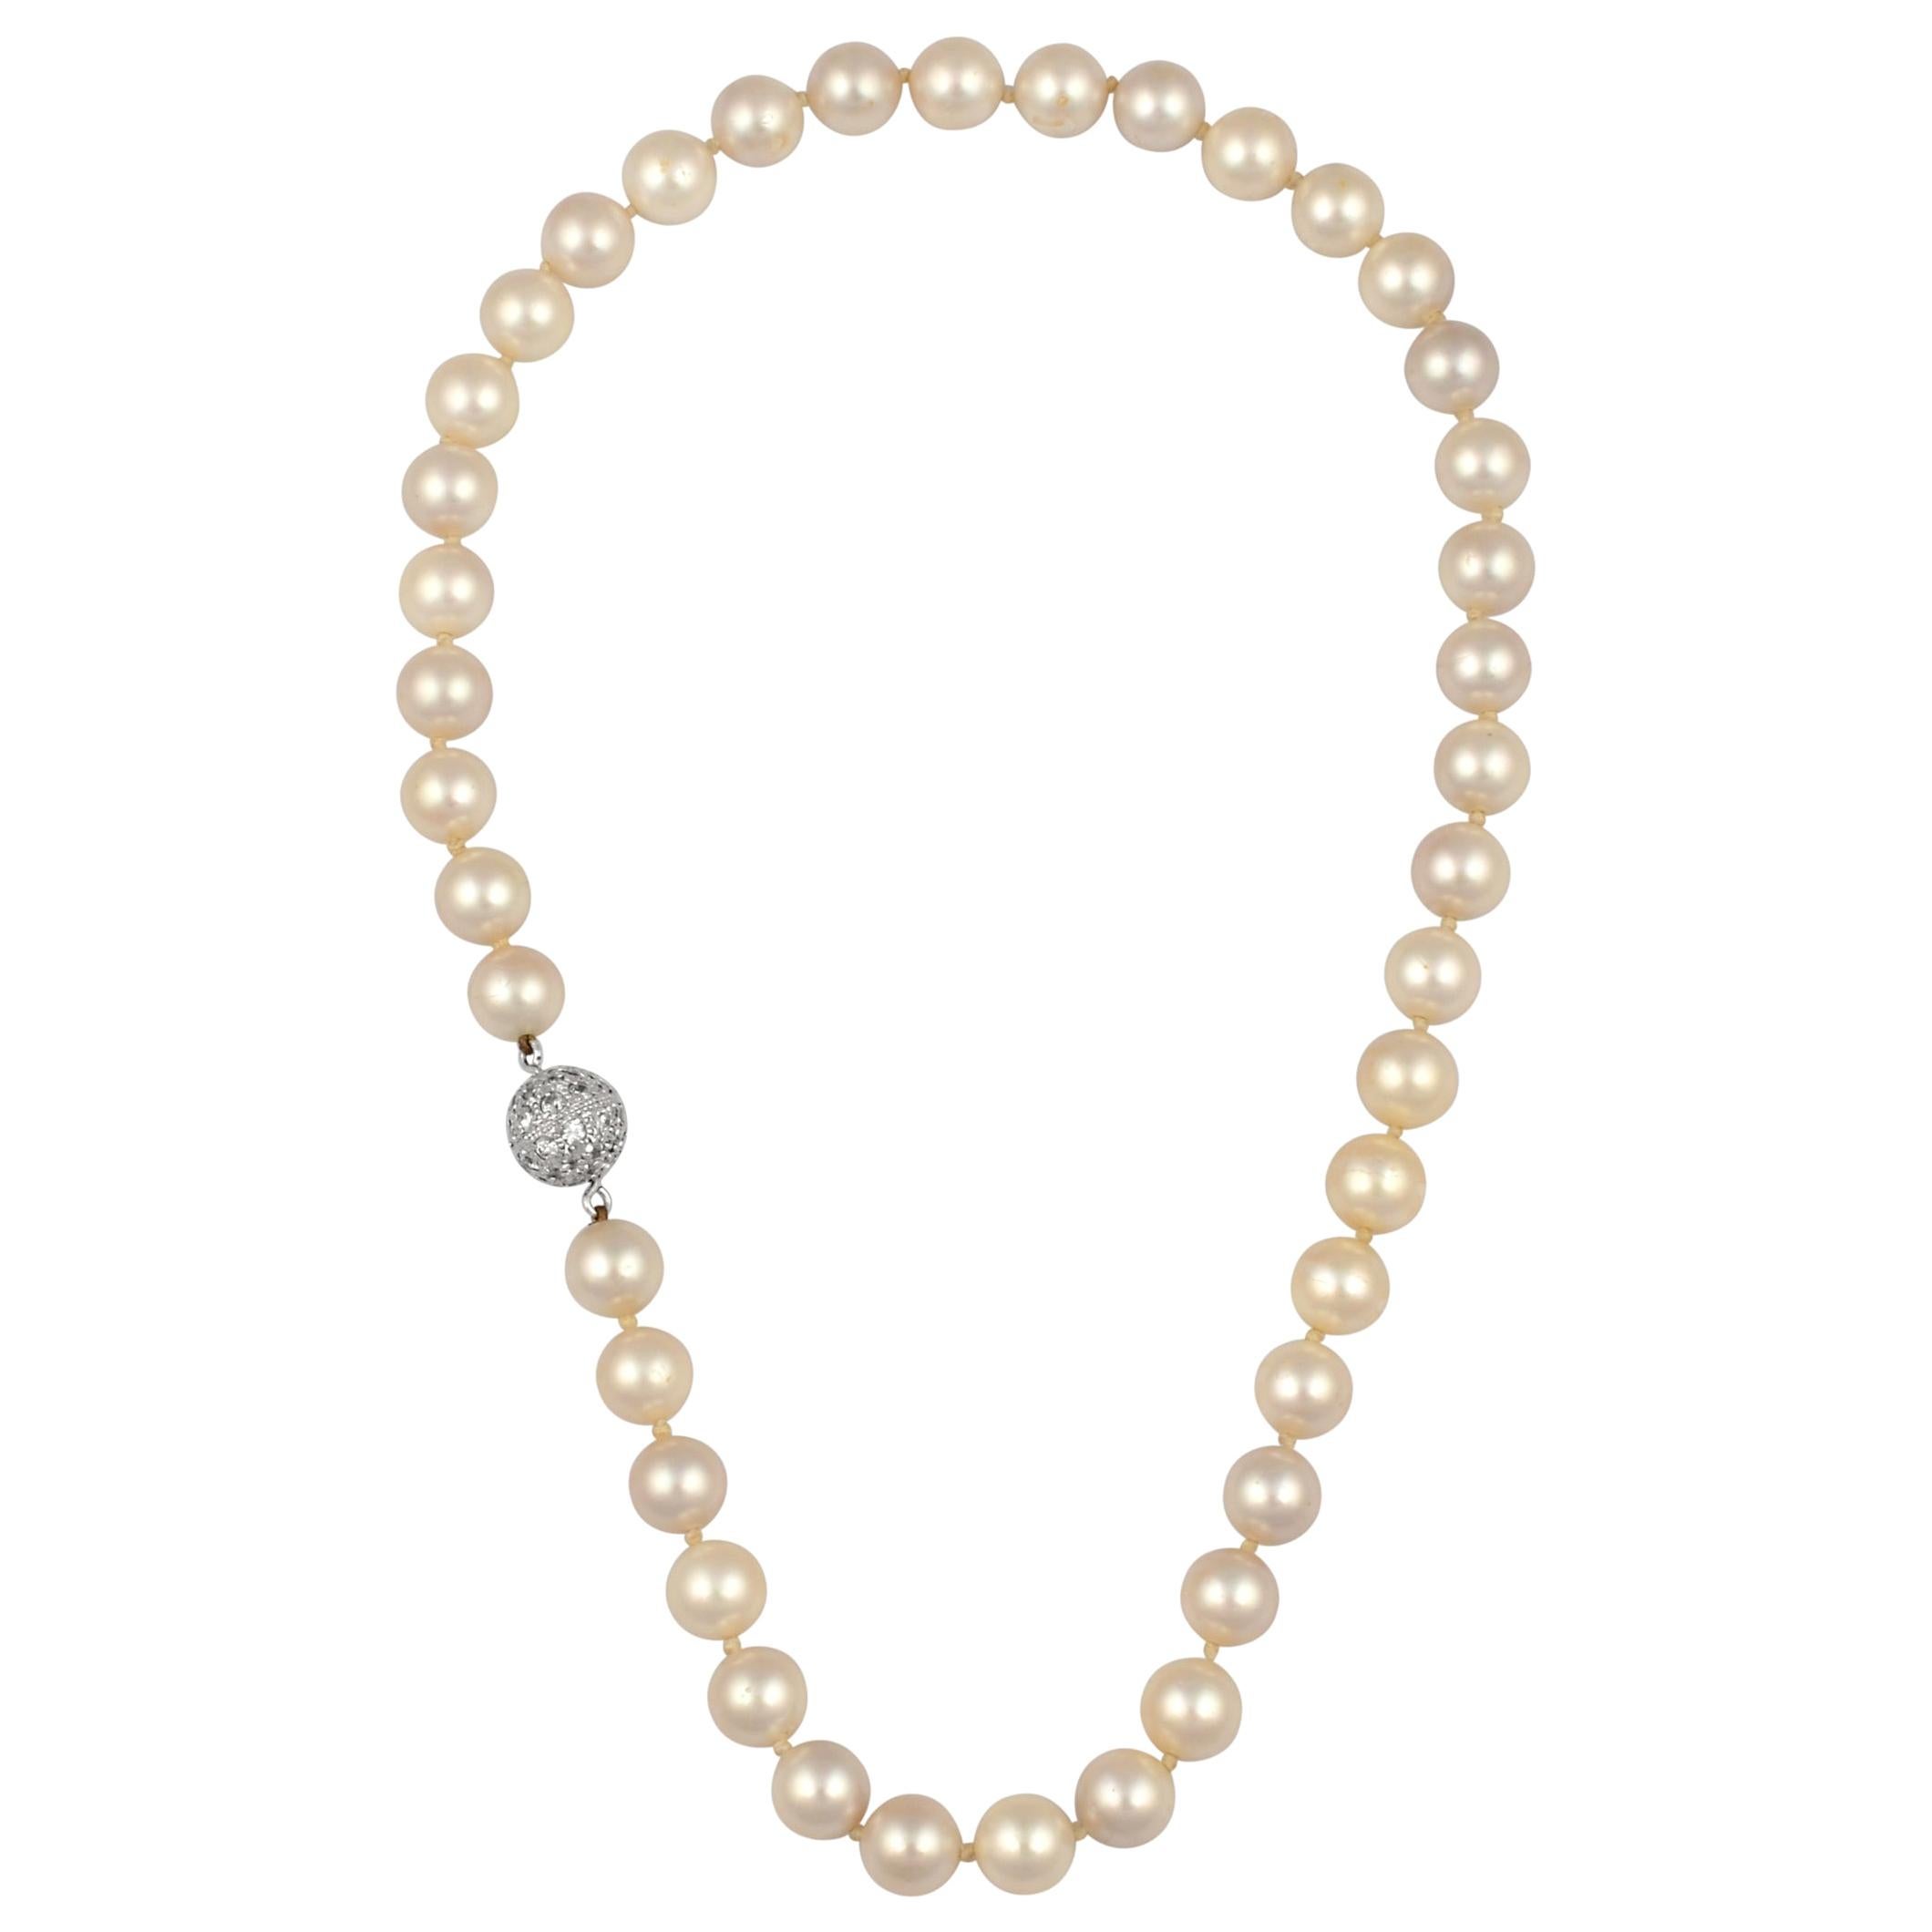 41 Round Akoya Pearls Strand Necklace Set in Metal Ball Clasp